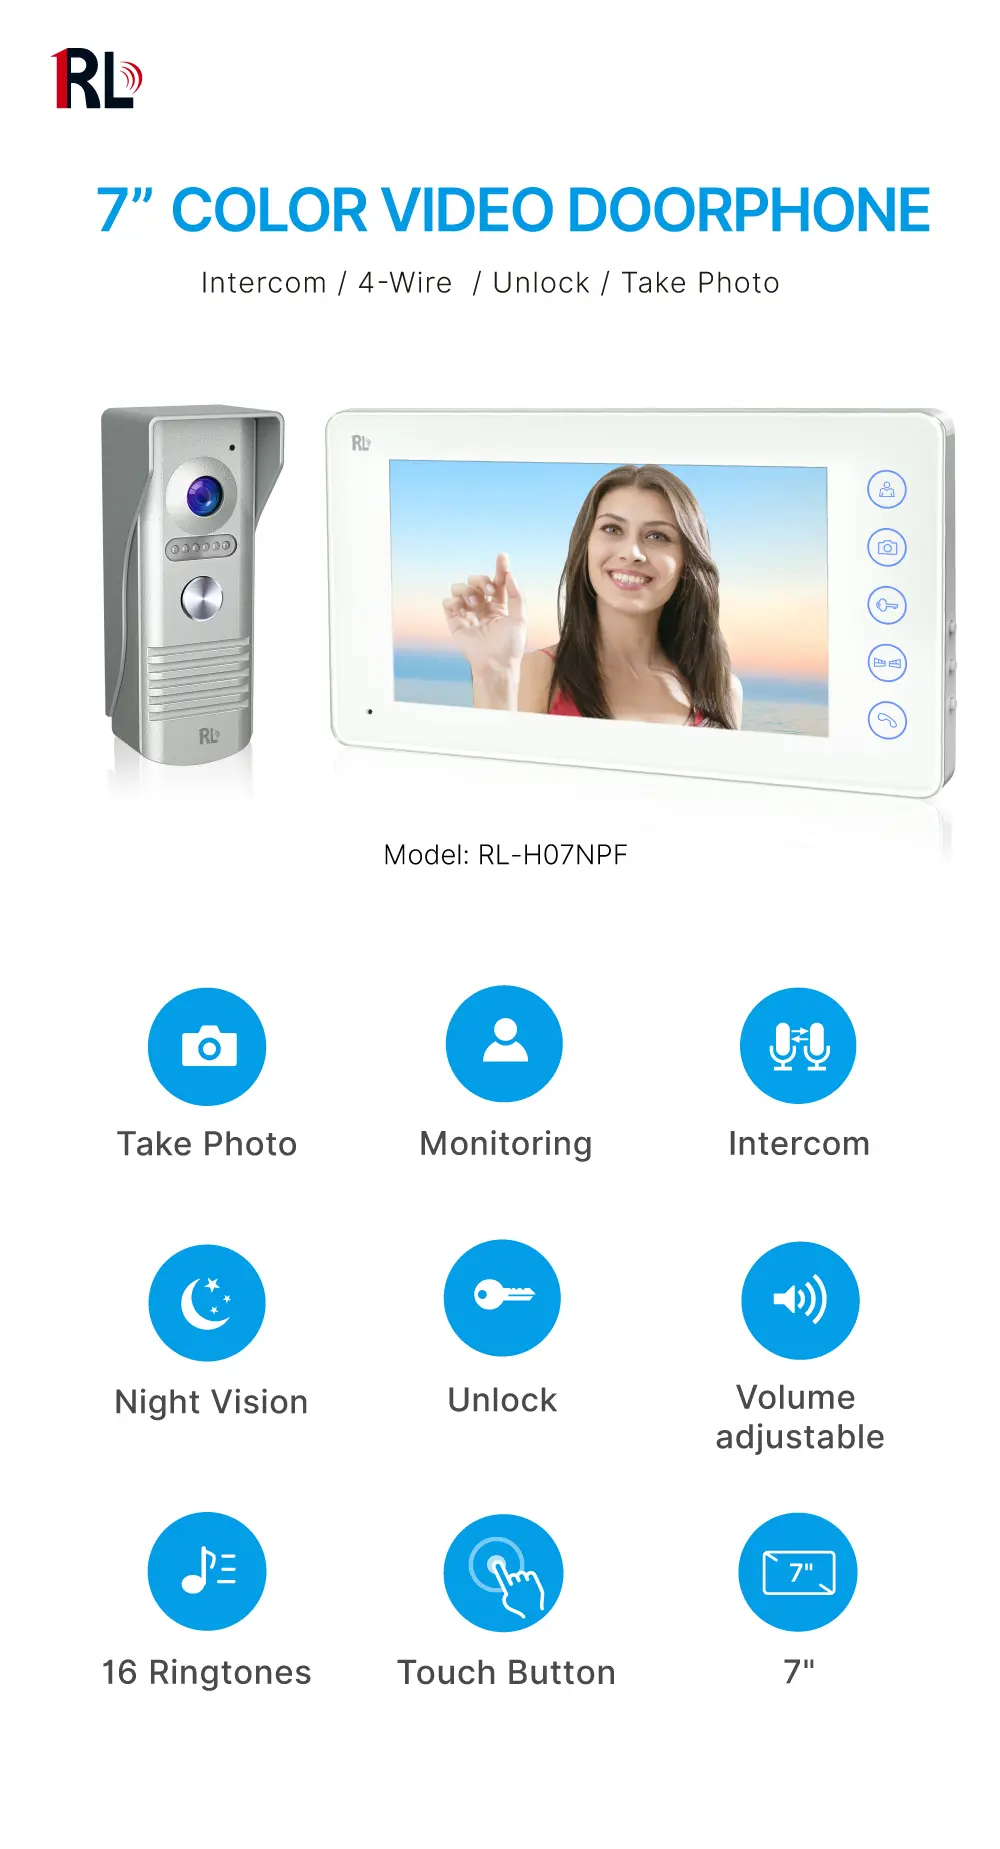 7inch Video Doorphone With Photo Memory #RL-H07NPU. - Between indoor & outdoor units- Weatherproof- Night vision camera - Capture clear image even at night._01